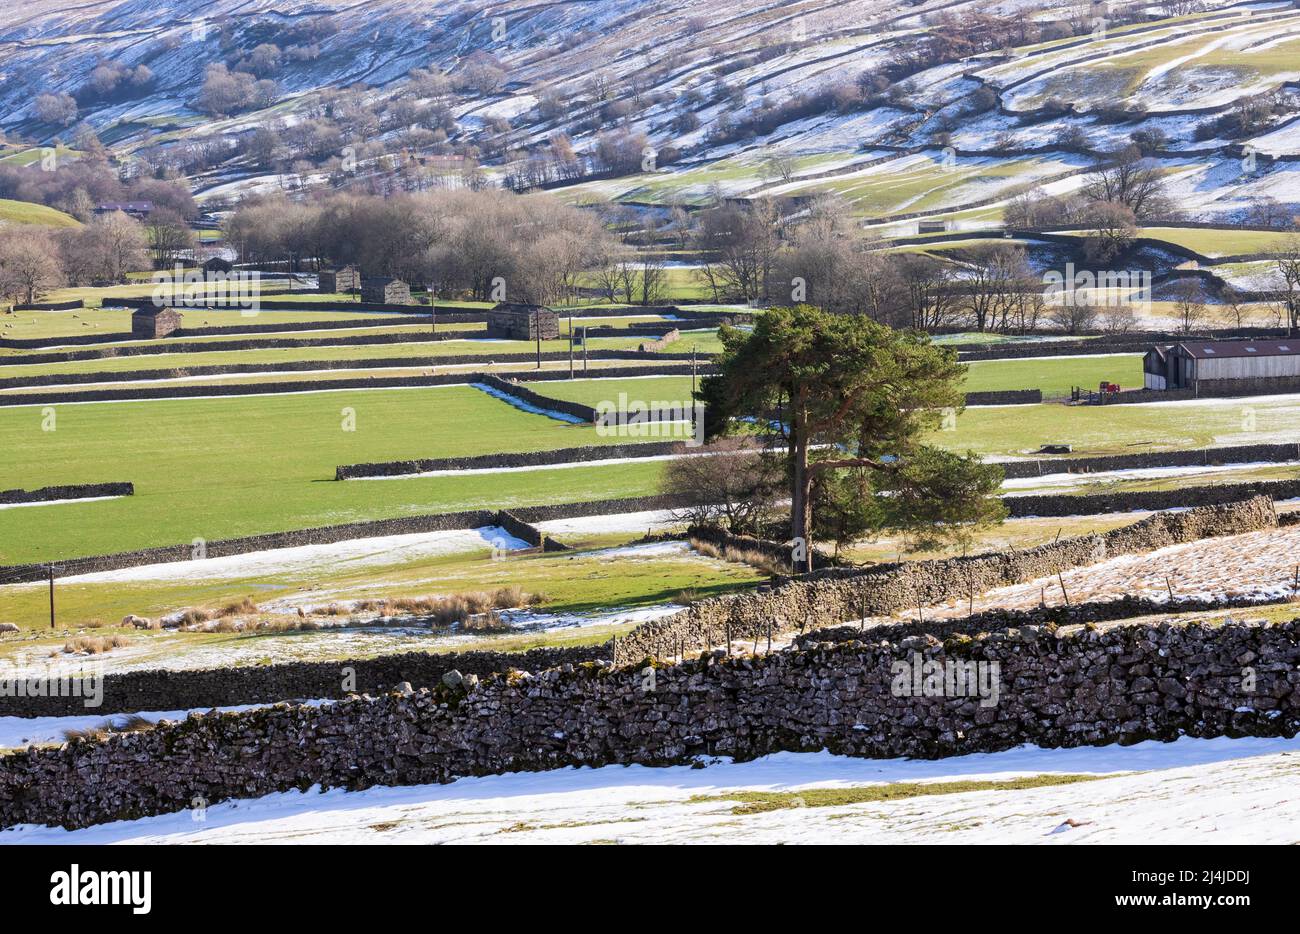 Swaledale, Yorkshire Dales National Park. Snow at the edges of dry stone wall lined fields and pastures with iconic stone barns in late February. Stock Photo